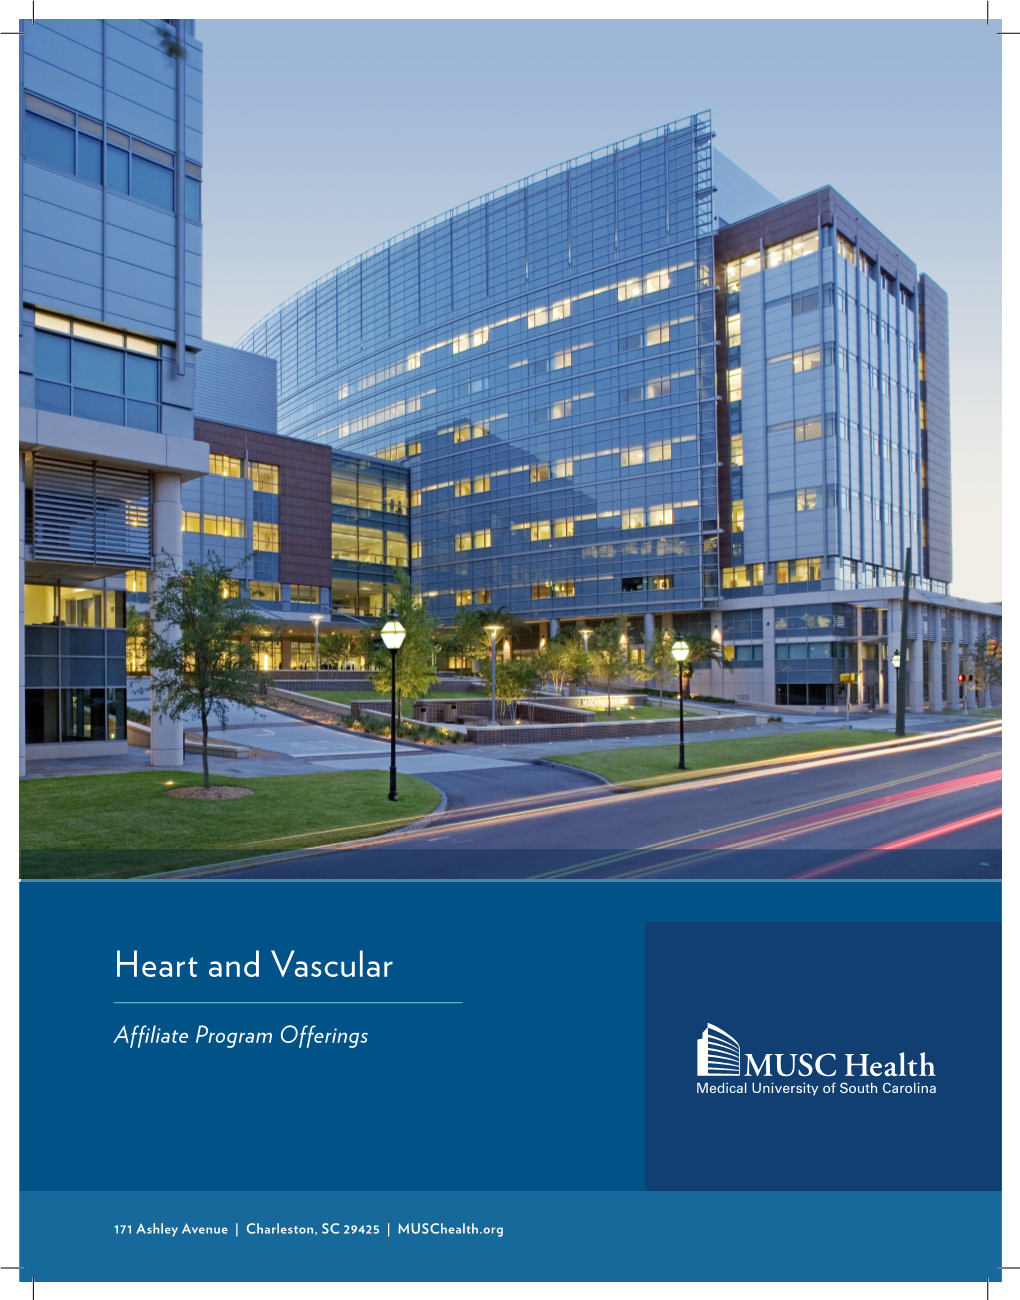 MUSC Health Affiliations Formal Heart and Vascular Service Offerings